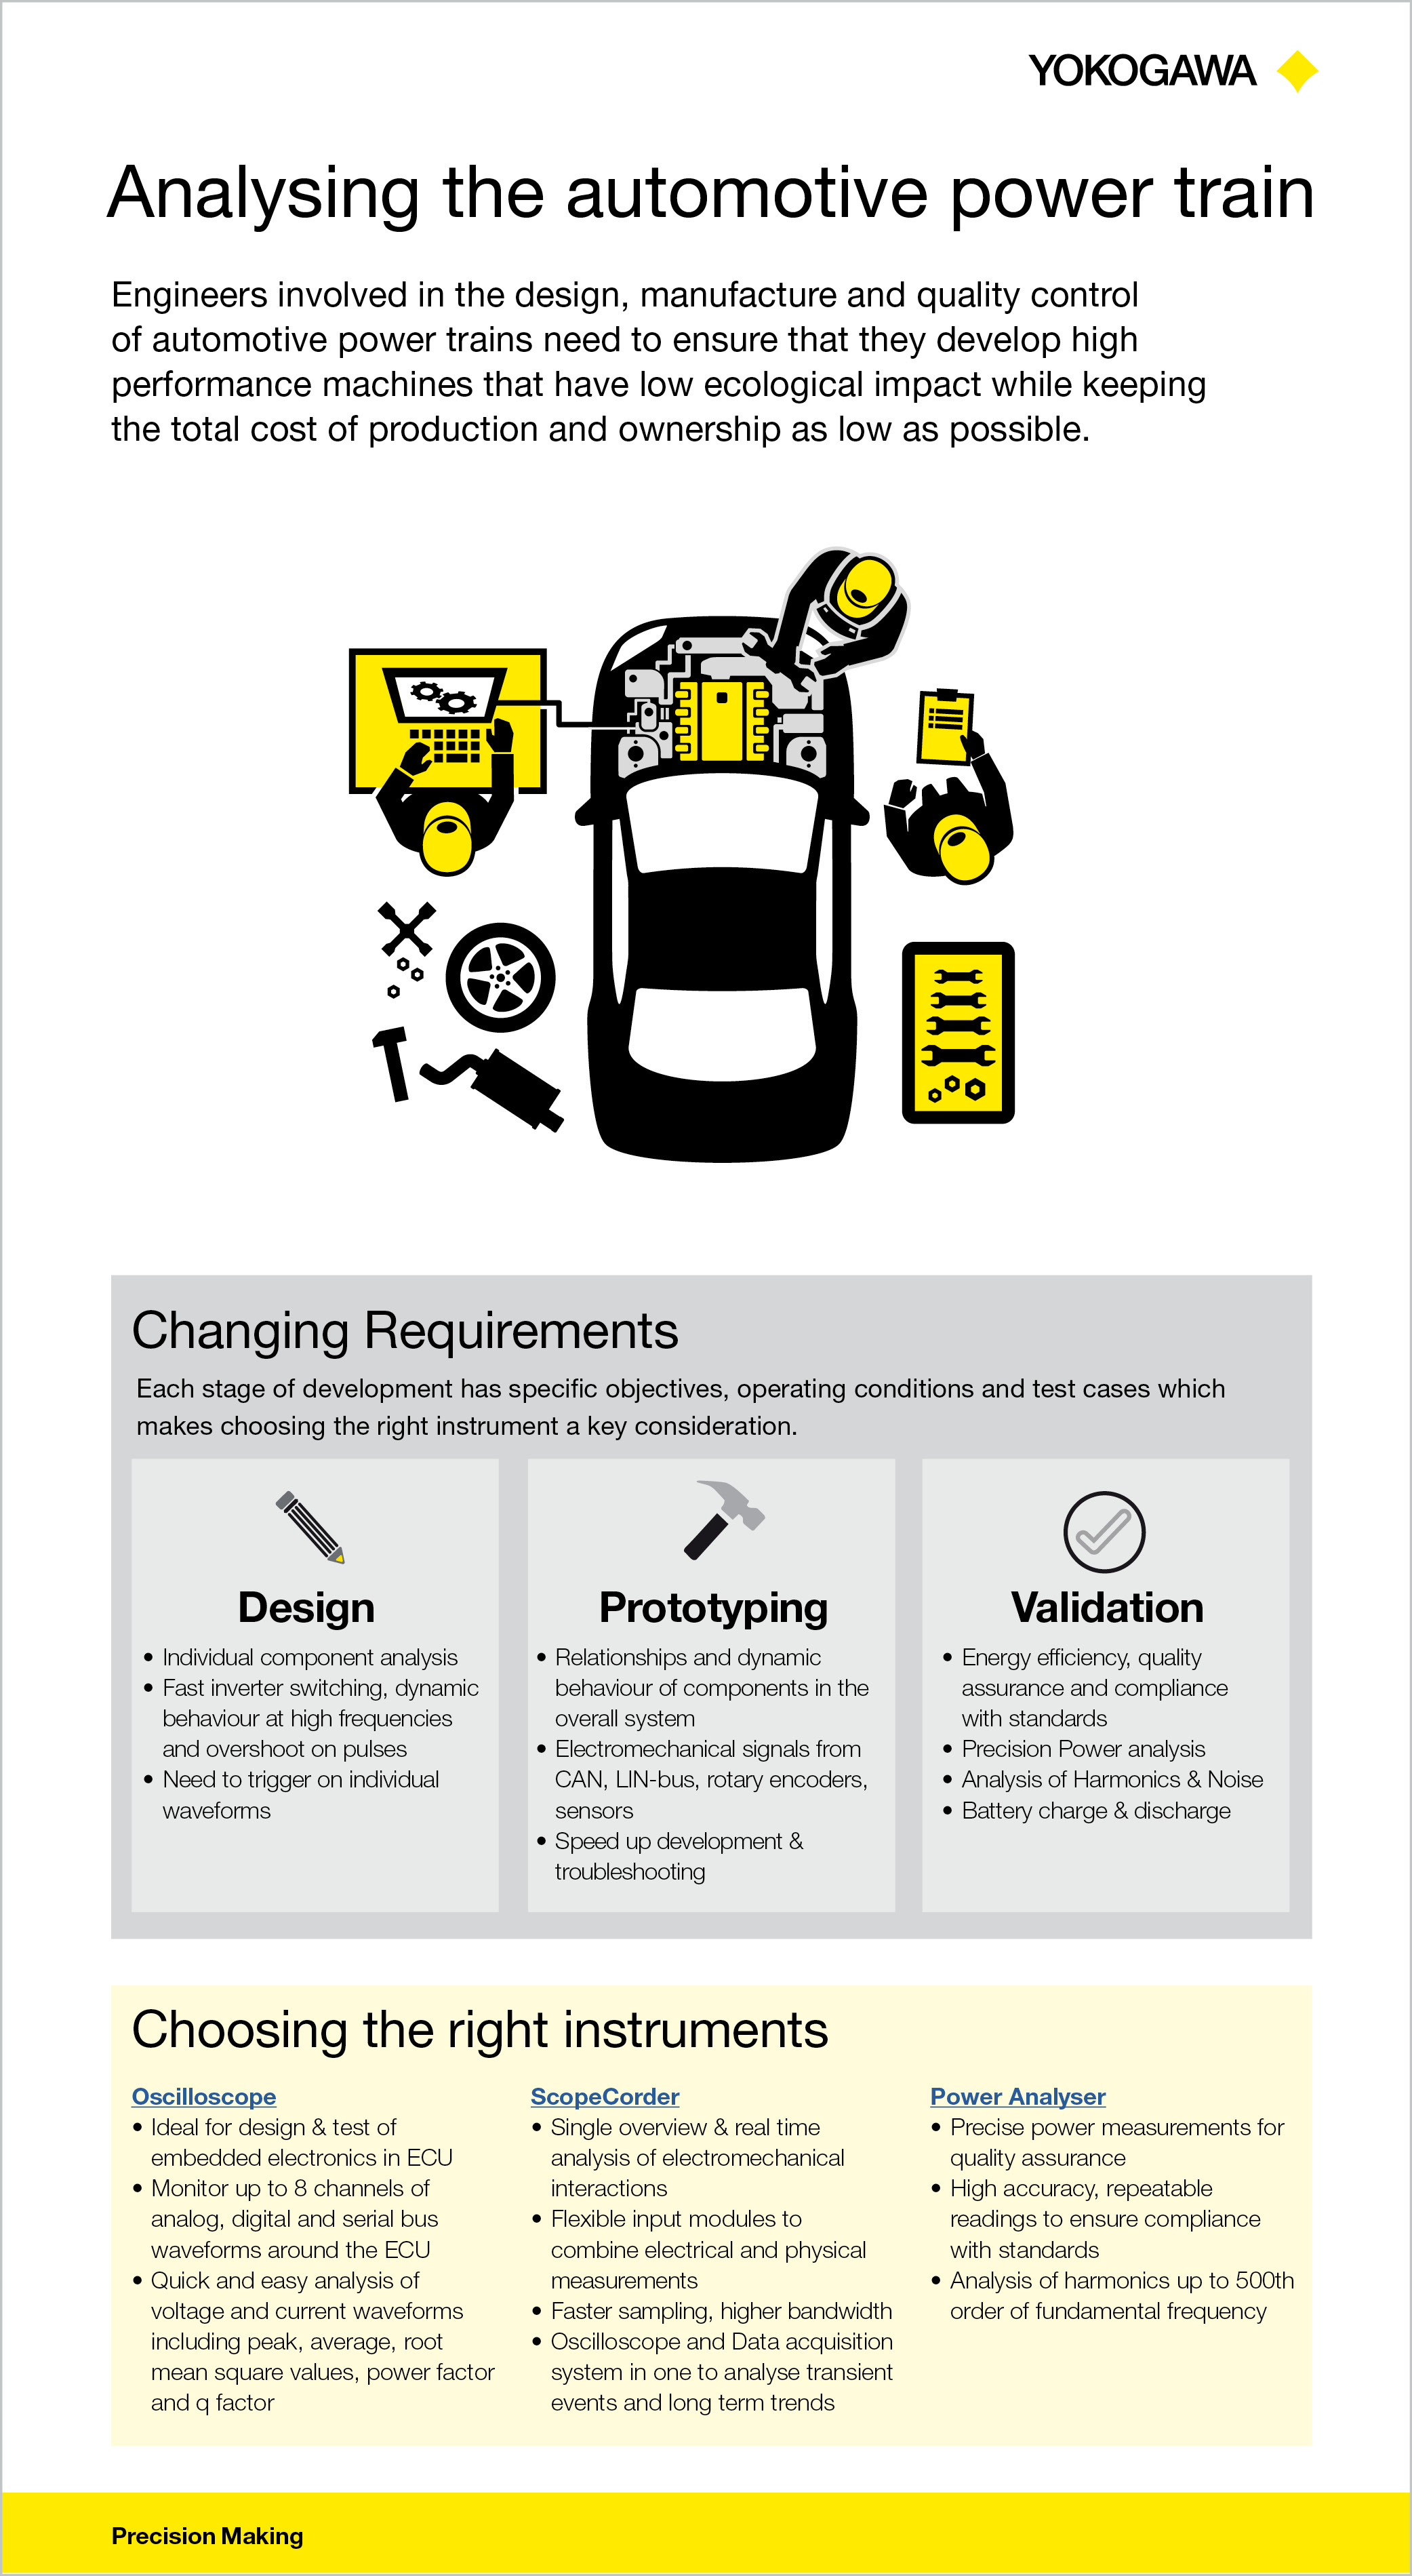 Download infographic: Engineers involved in the design, manufacture and quality control of automotive power trains need to ensure that they develop high performance machines that have low ecological impact while keeping the total cost of production and ownership as low as possible. 